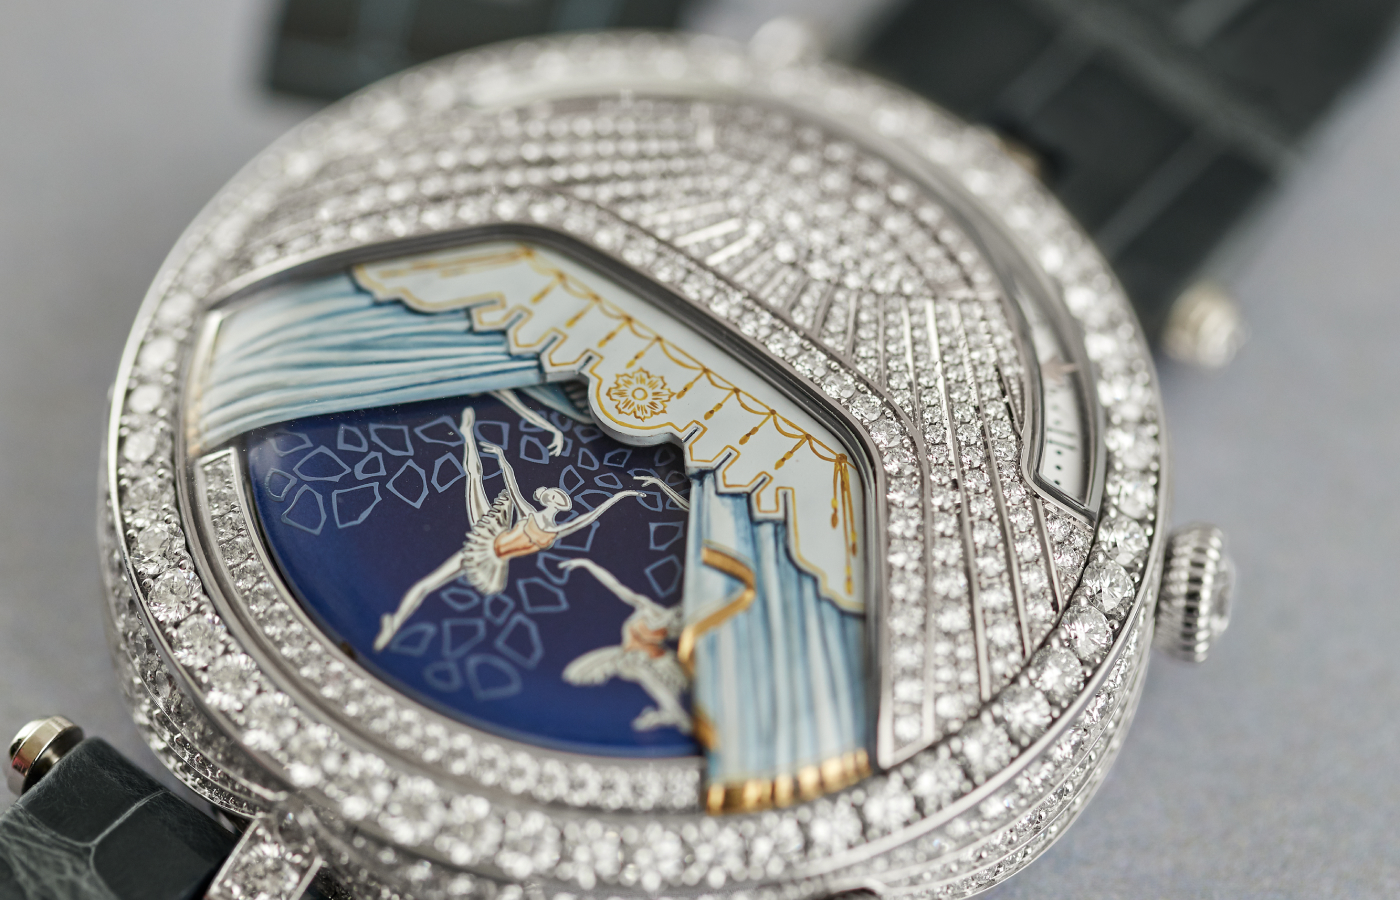 The Van Cleef & Arpels Lady Arpels Ballerine Musicale Diamant watch in 18k white gold and diamonds, to be showcased at the Poetry of Time exhibition in London 